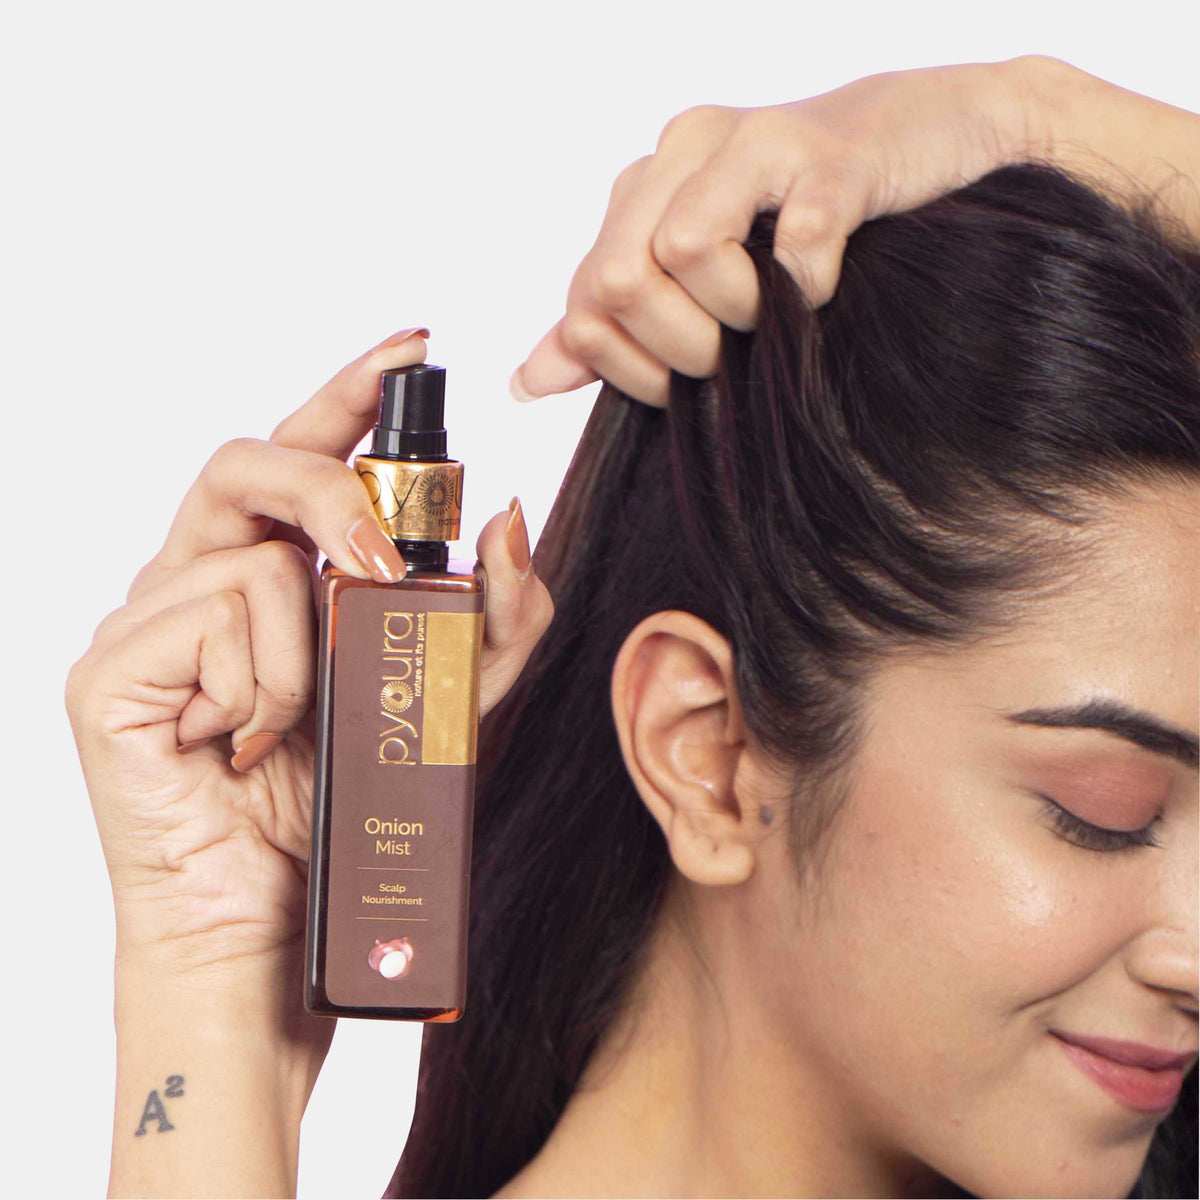 Wholesome Hair and Scalp Care Kit  <h4> Pure extracts of natural ingredients <h4> <h6> Pack contains 2 spray mists of 50 ml each and 1 Mask 35 gm <h6>